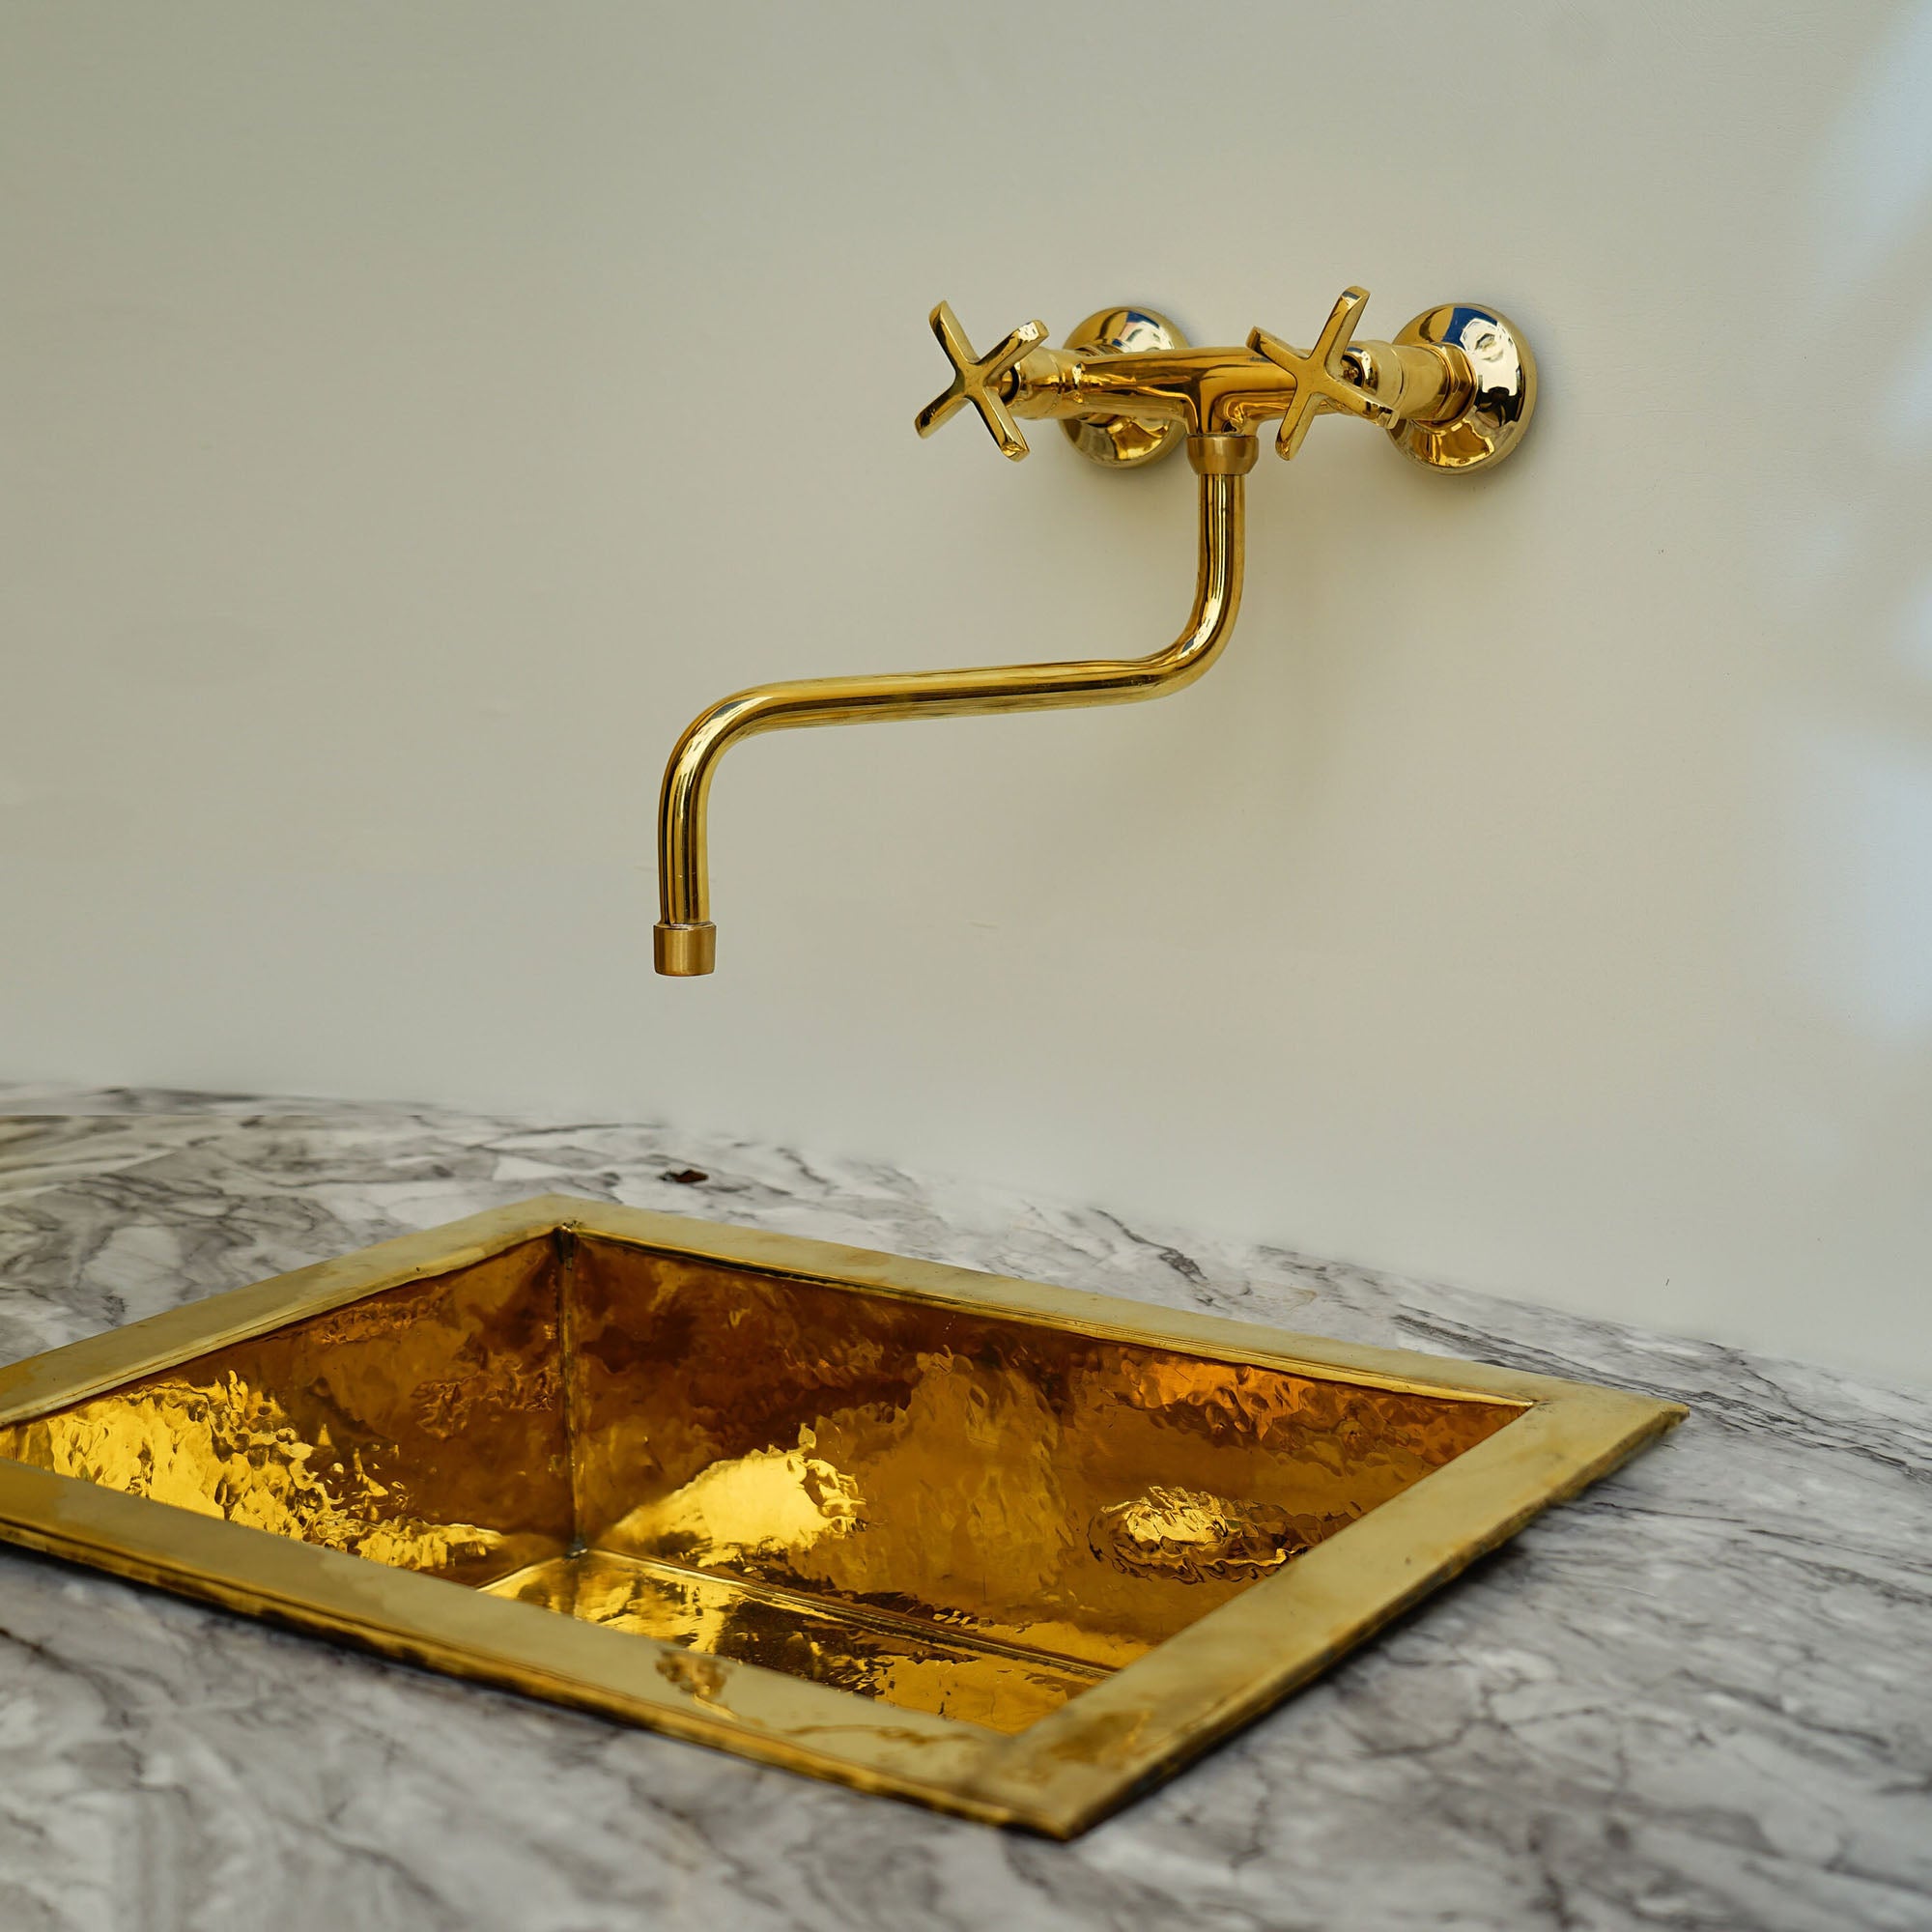 Unlacquered Brass Kitchen Faucet, Handcrafted Brass Wall Mounted Kitchen Faucet